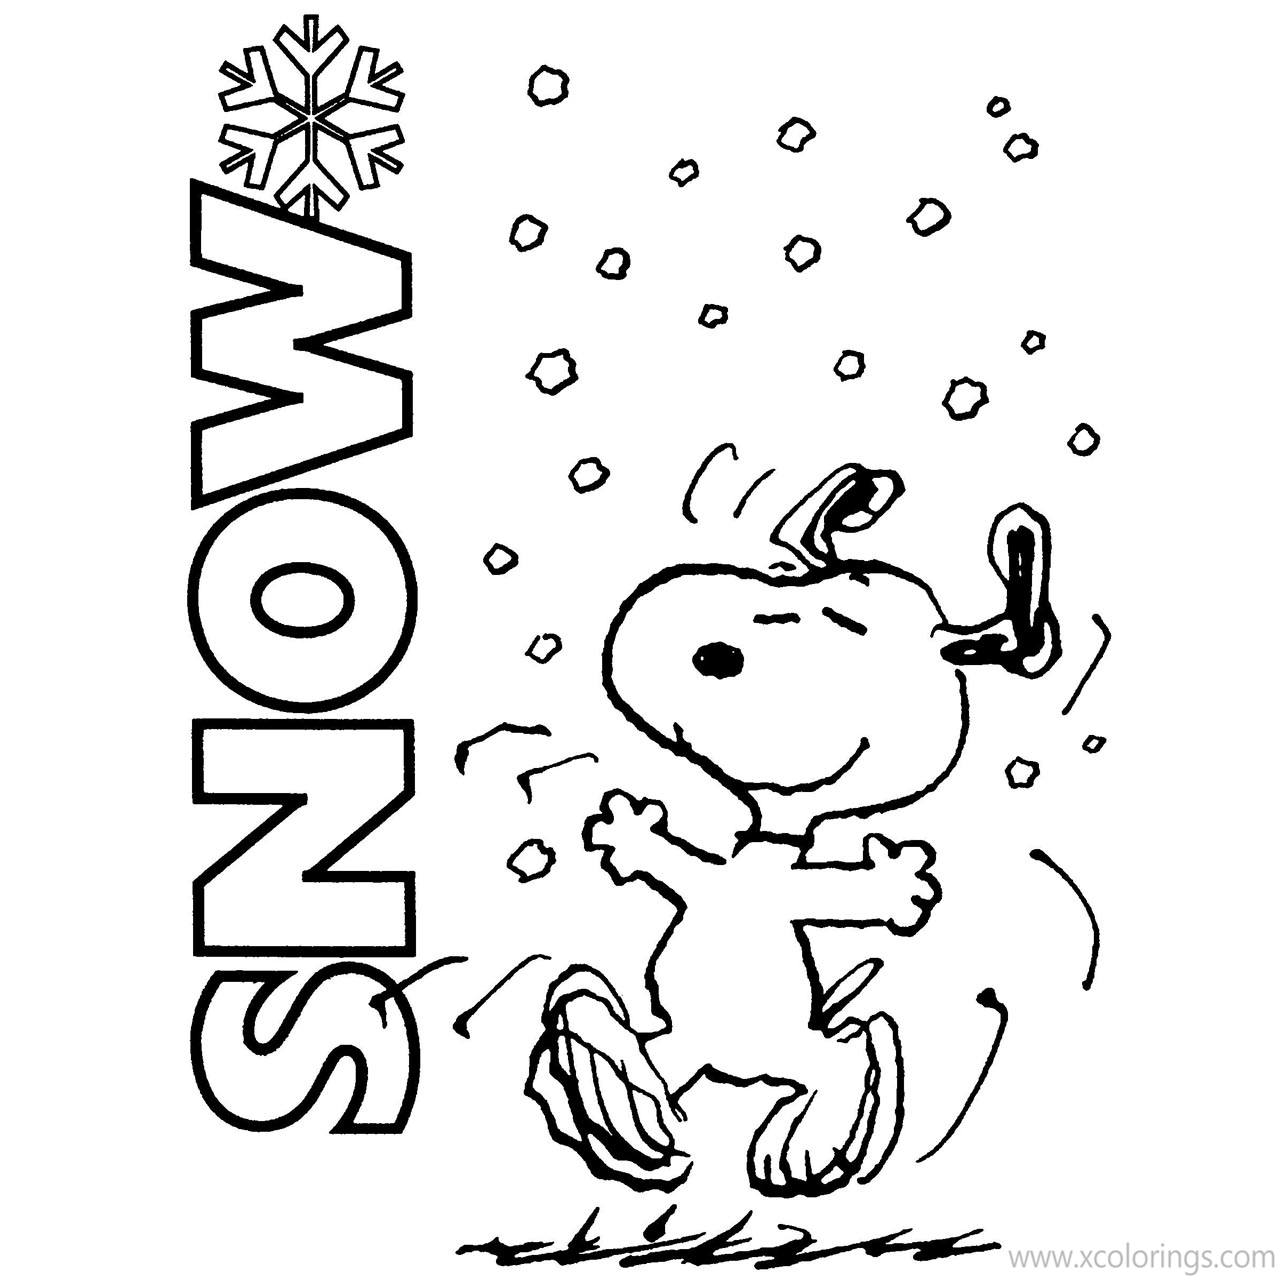 Free Charlie Brown Christmas Coloring Pages Snoopy and Snow printable